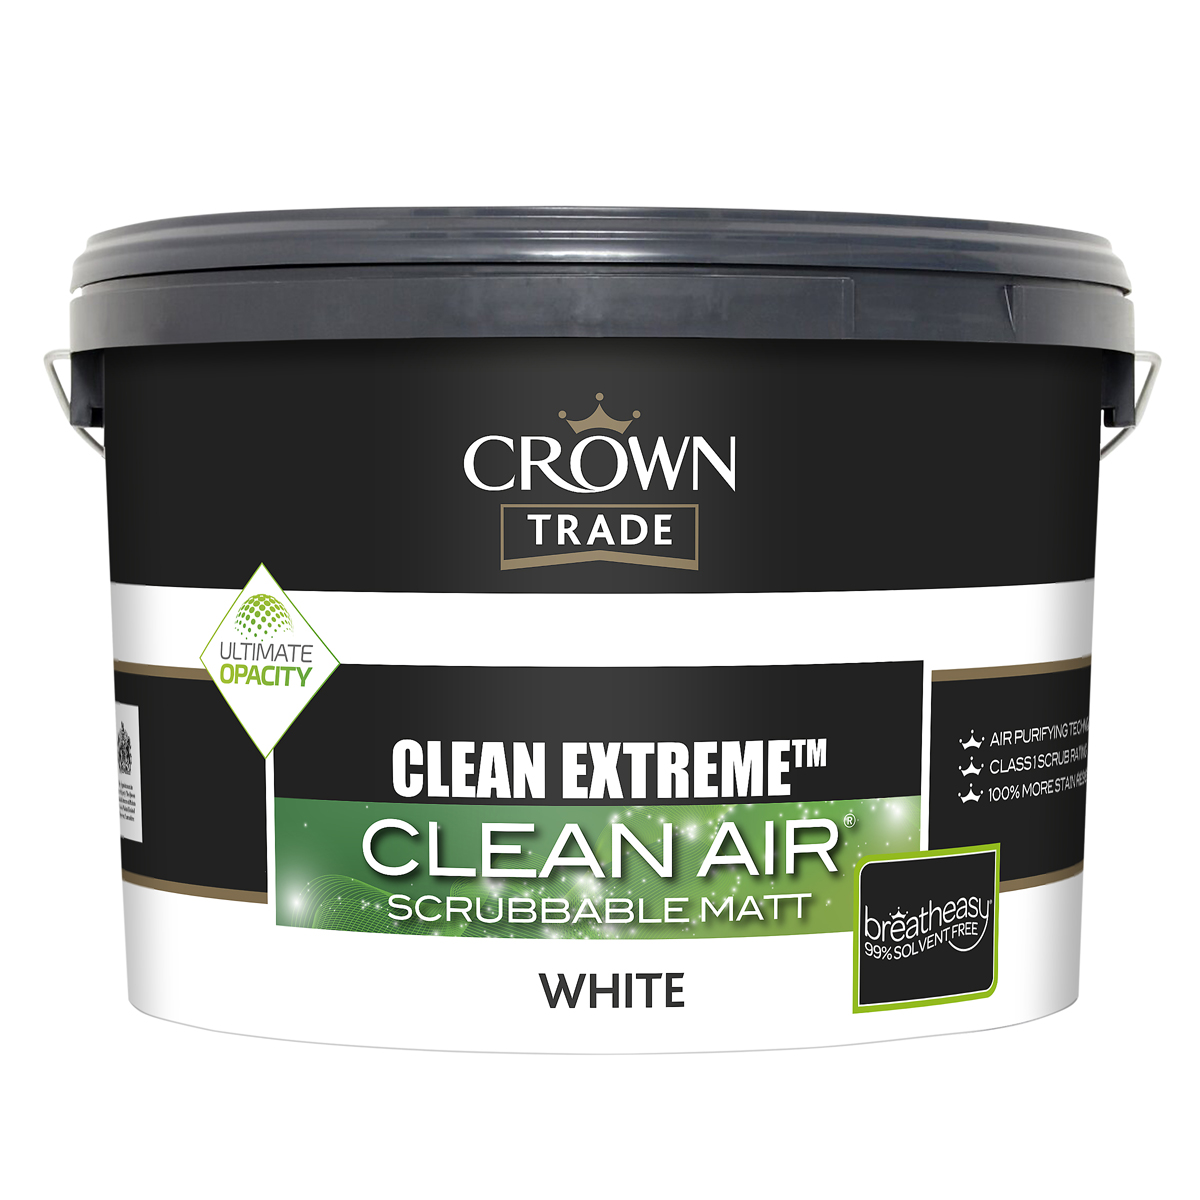 Crown Trade launches first ultra low VOC, air purifying paint - labm